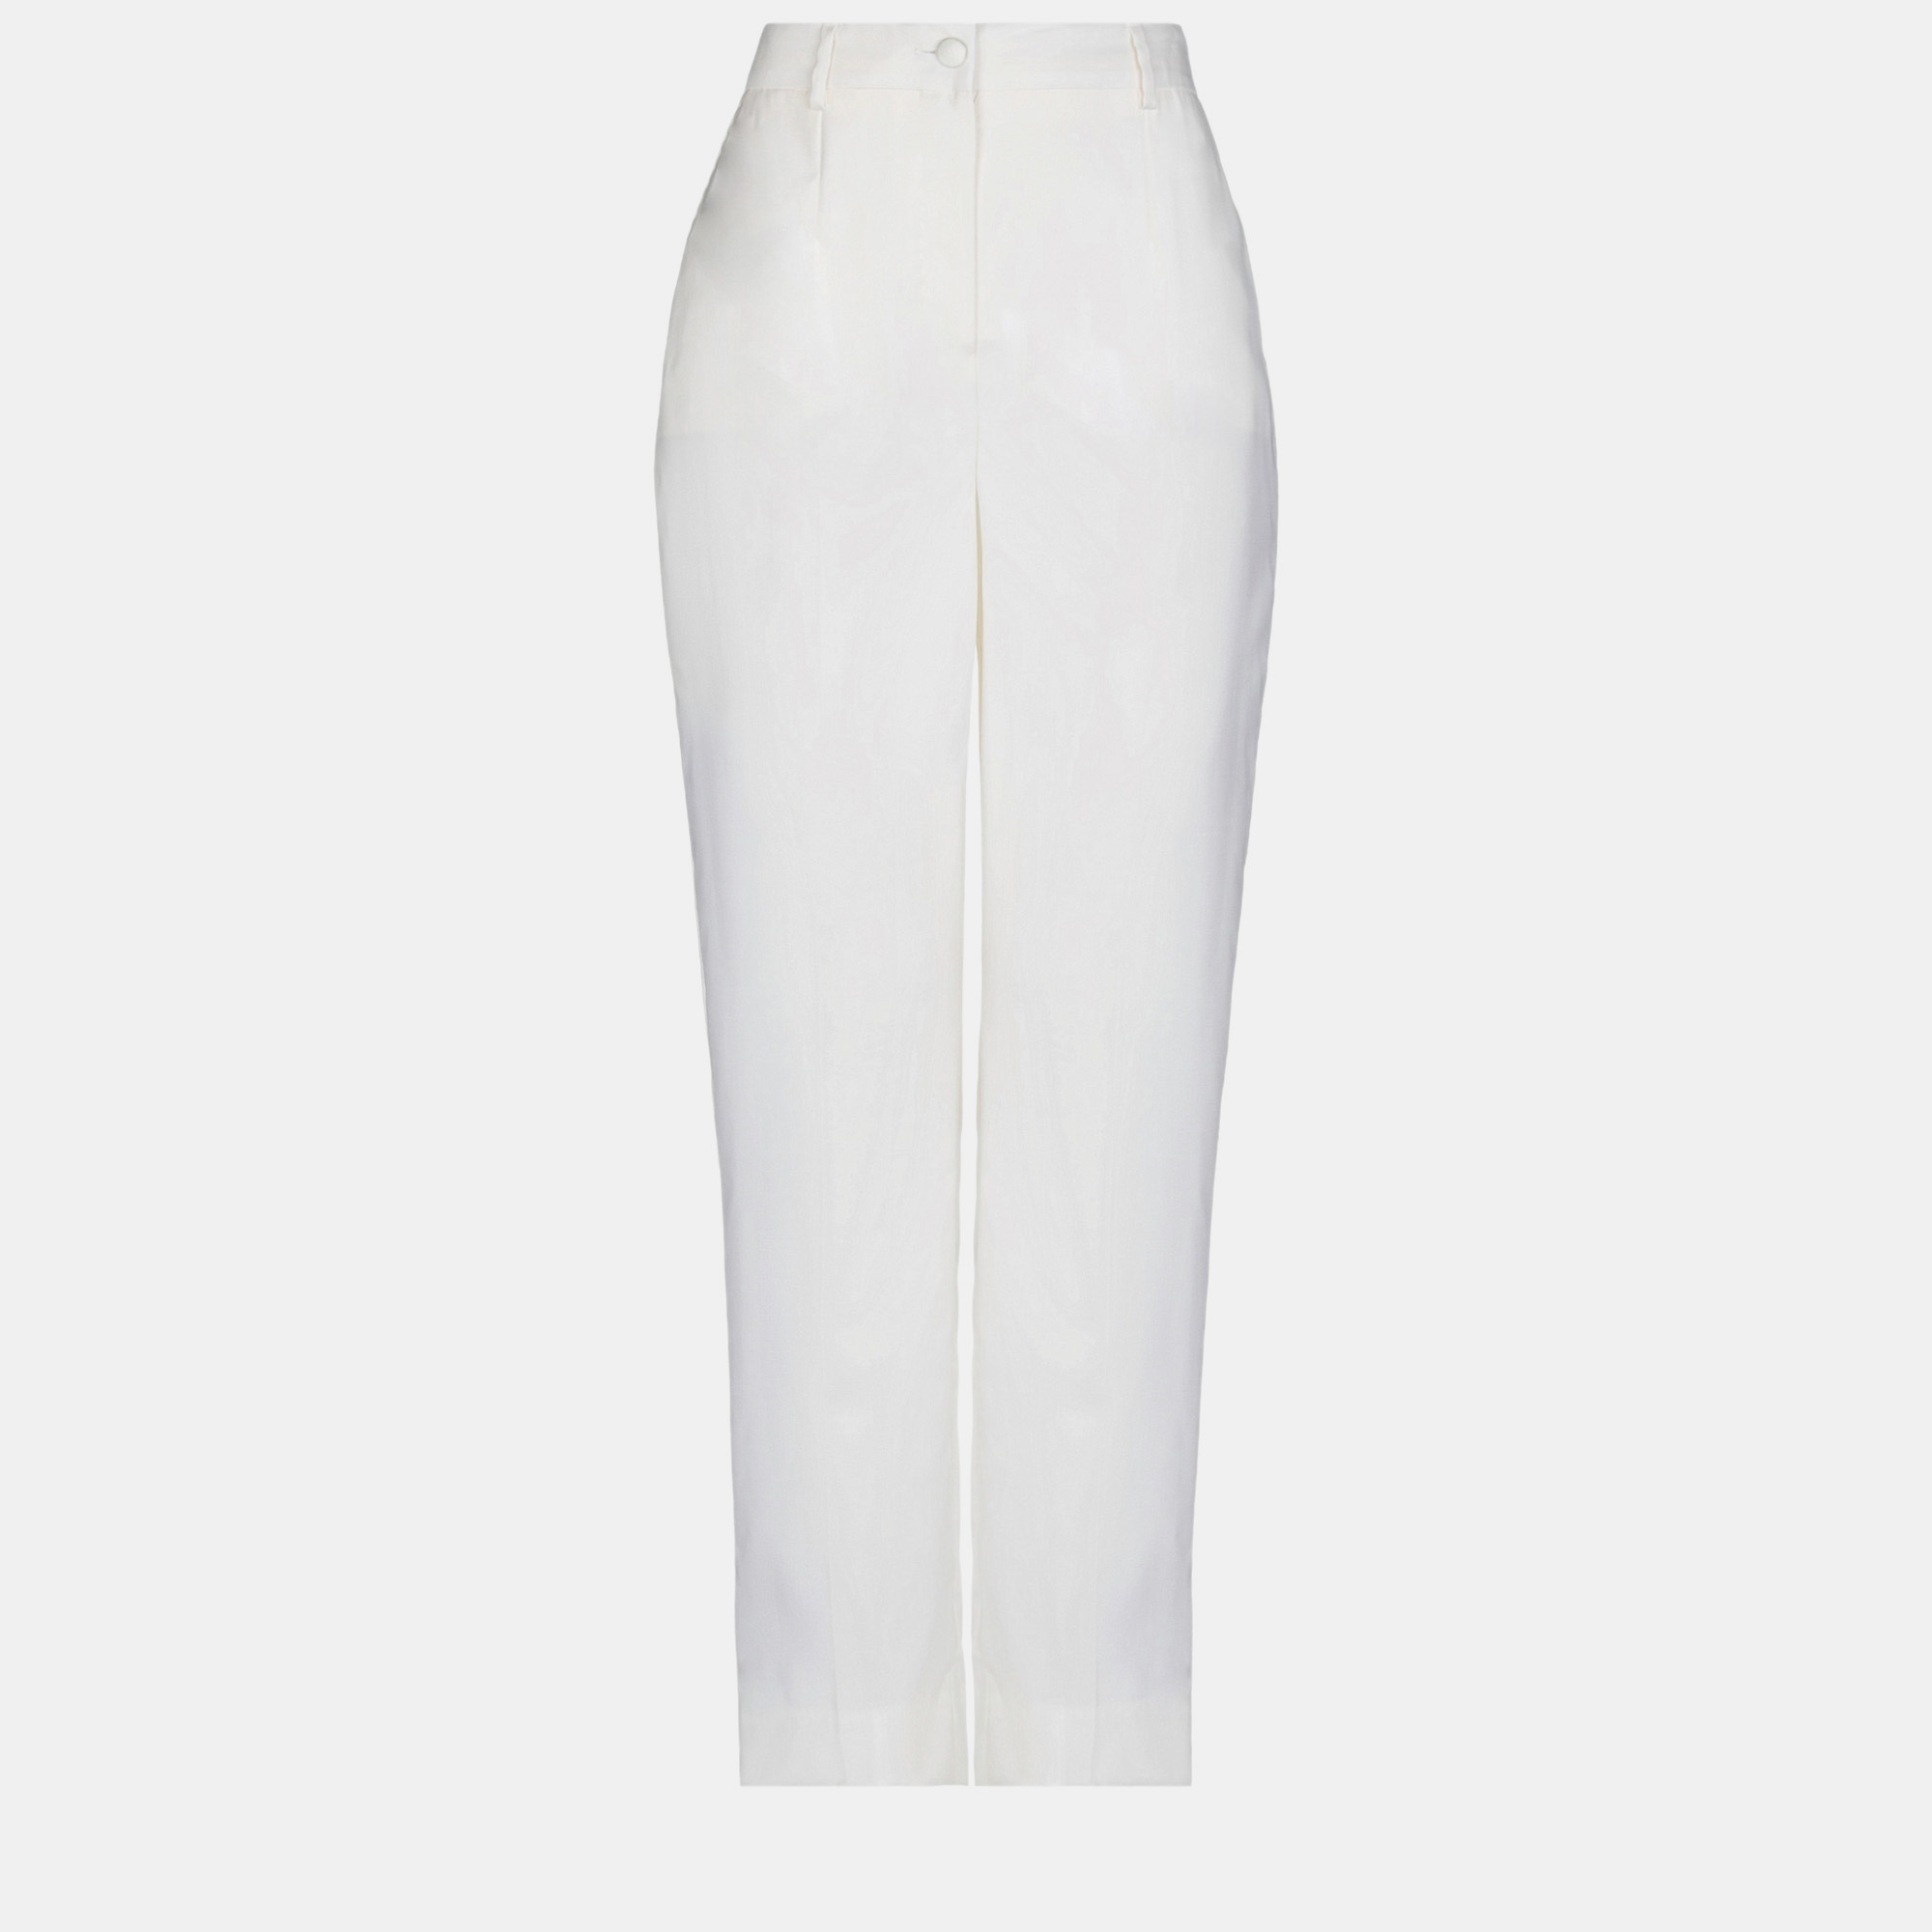 Pre-owned Dolce & Gabbana White Virgin Wool Trousers Size 38